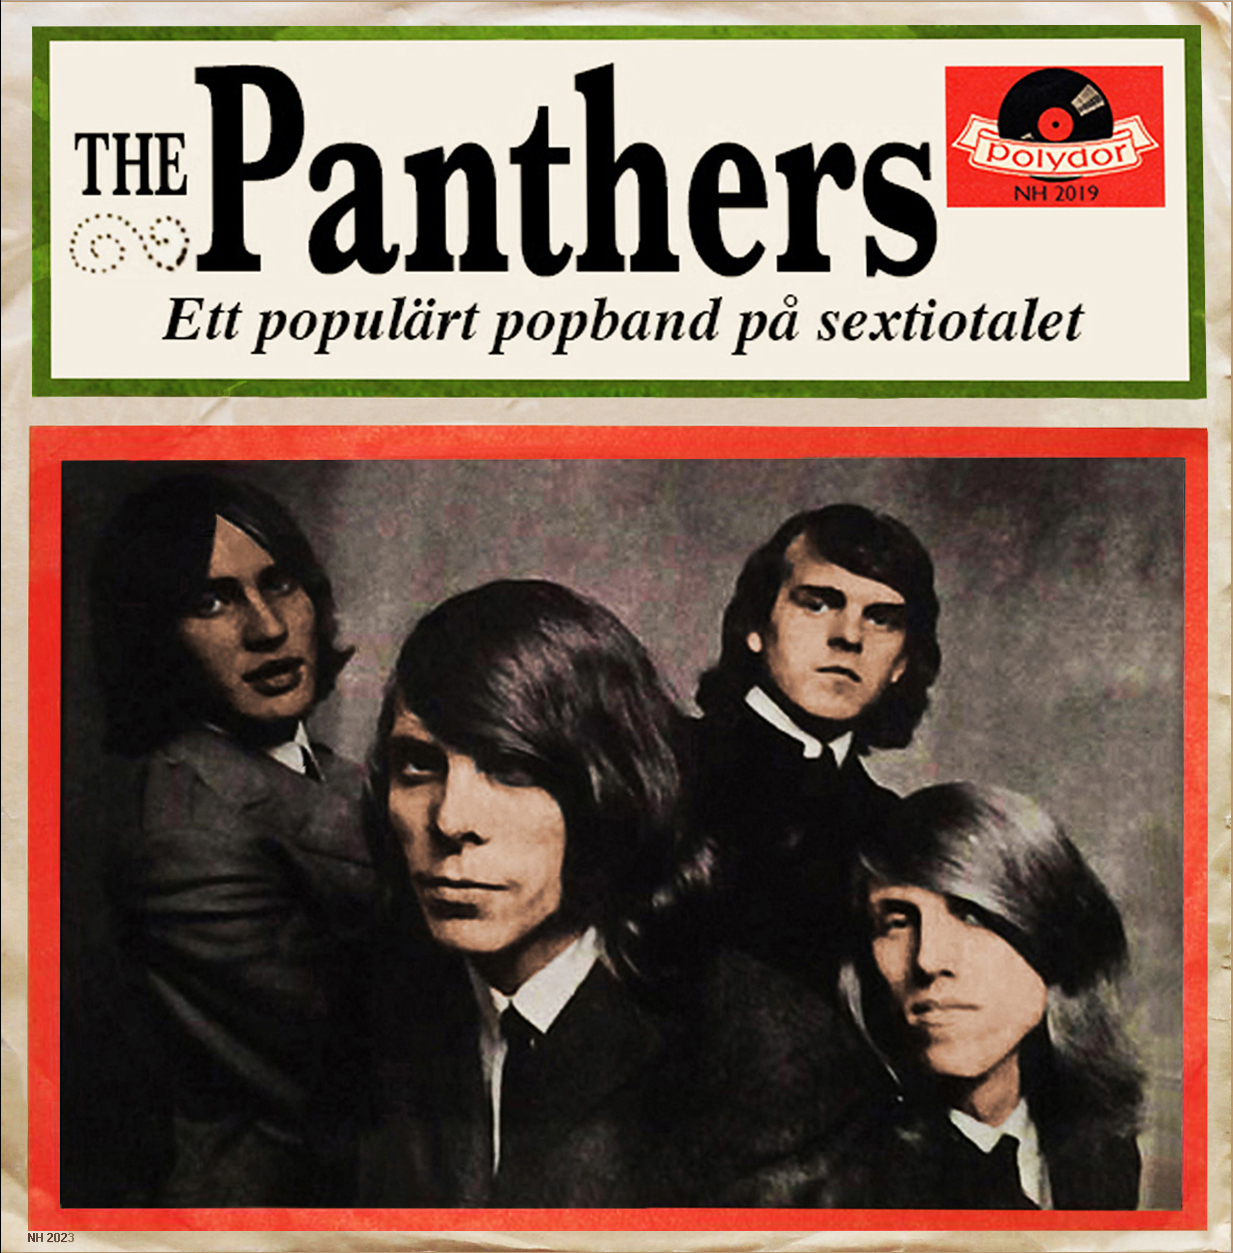 THE PANTHERS